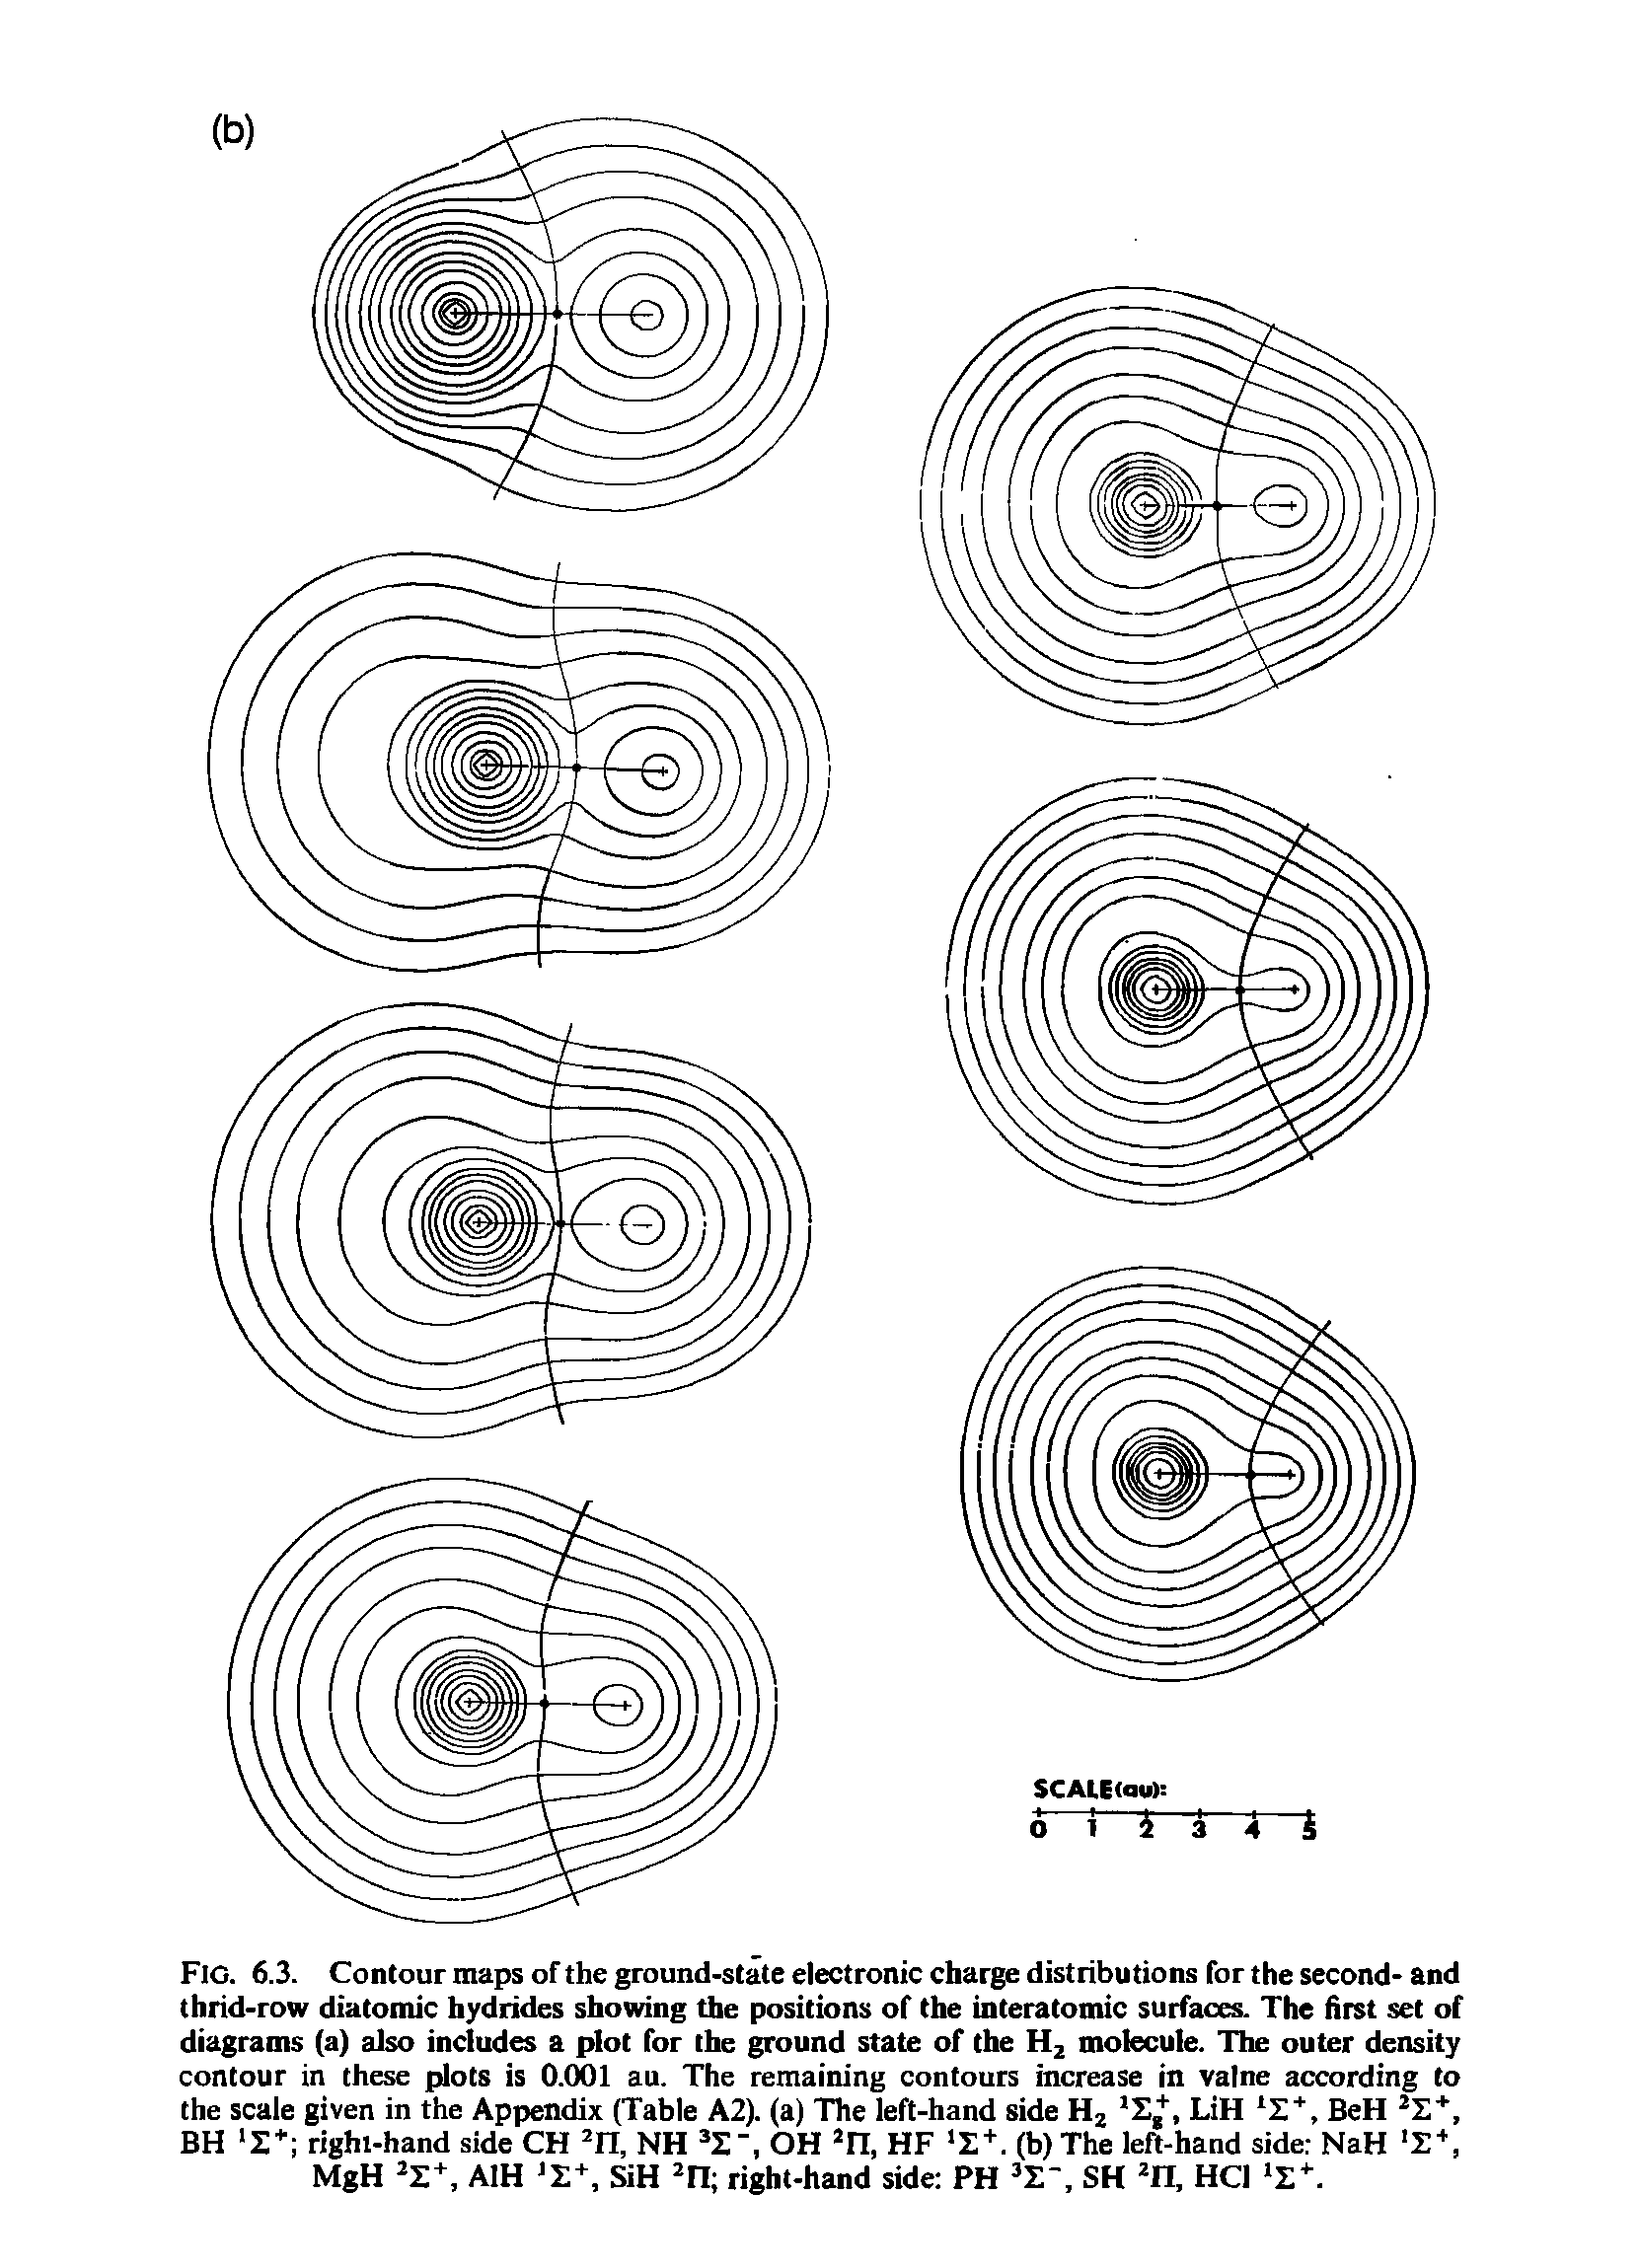 Fig. 6.3. Contour maps of the ground-state electronic charge distributions for the second- and thrid-row diatomic hydrides showing the positions of the interatomic surfaces. The first set of diagrams (a) also includes a plot for the ground state of the Hj molecule. The outer density contour in these plots is 0.001 au. The remaining contours increase in valne according to the scale given in the Appendix (Table A2). (a) The left-hand side 2, LiH 2, BeH 2, BH 2 right-hand side CH n, NH 2", OH n, HF 2+. (b)The left-hand side NaH 2-, MgH 2+, AIH 2+, SiH right-hand side PH 2-, SH "H. HCI 2. ...